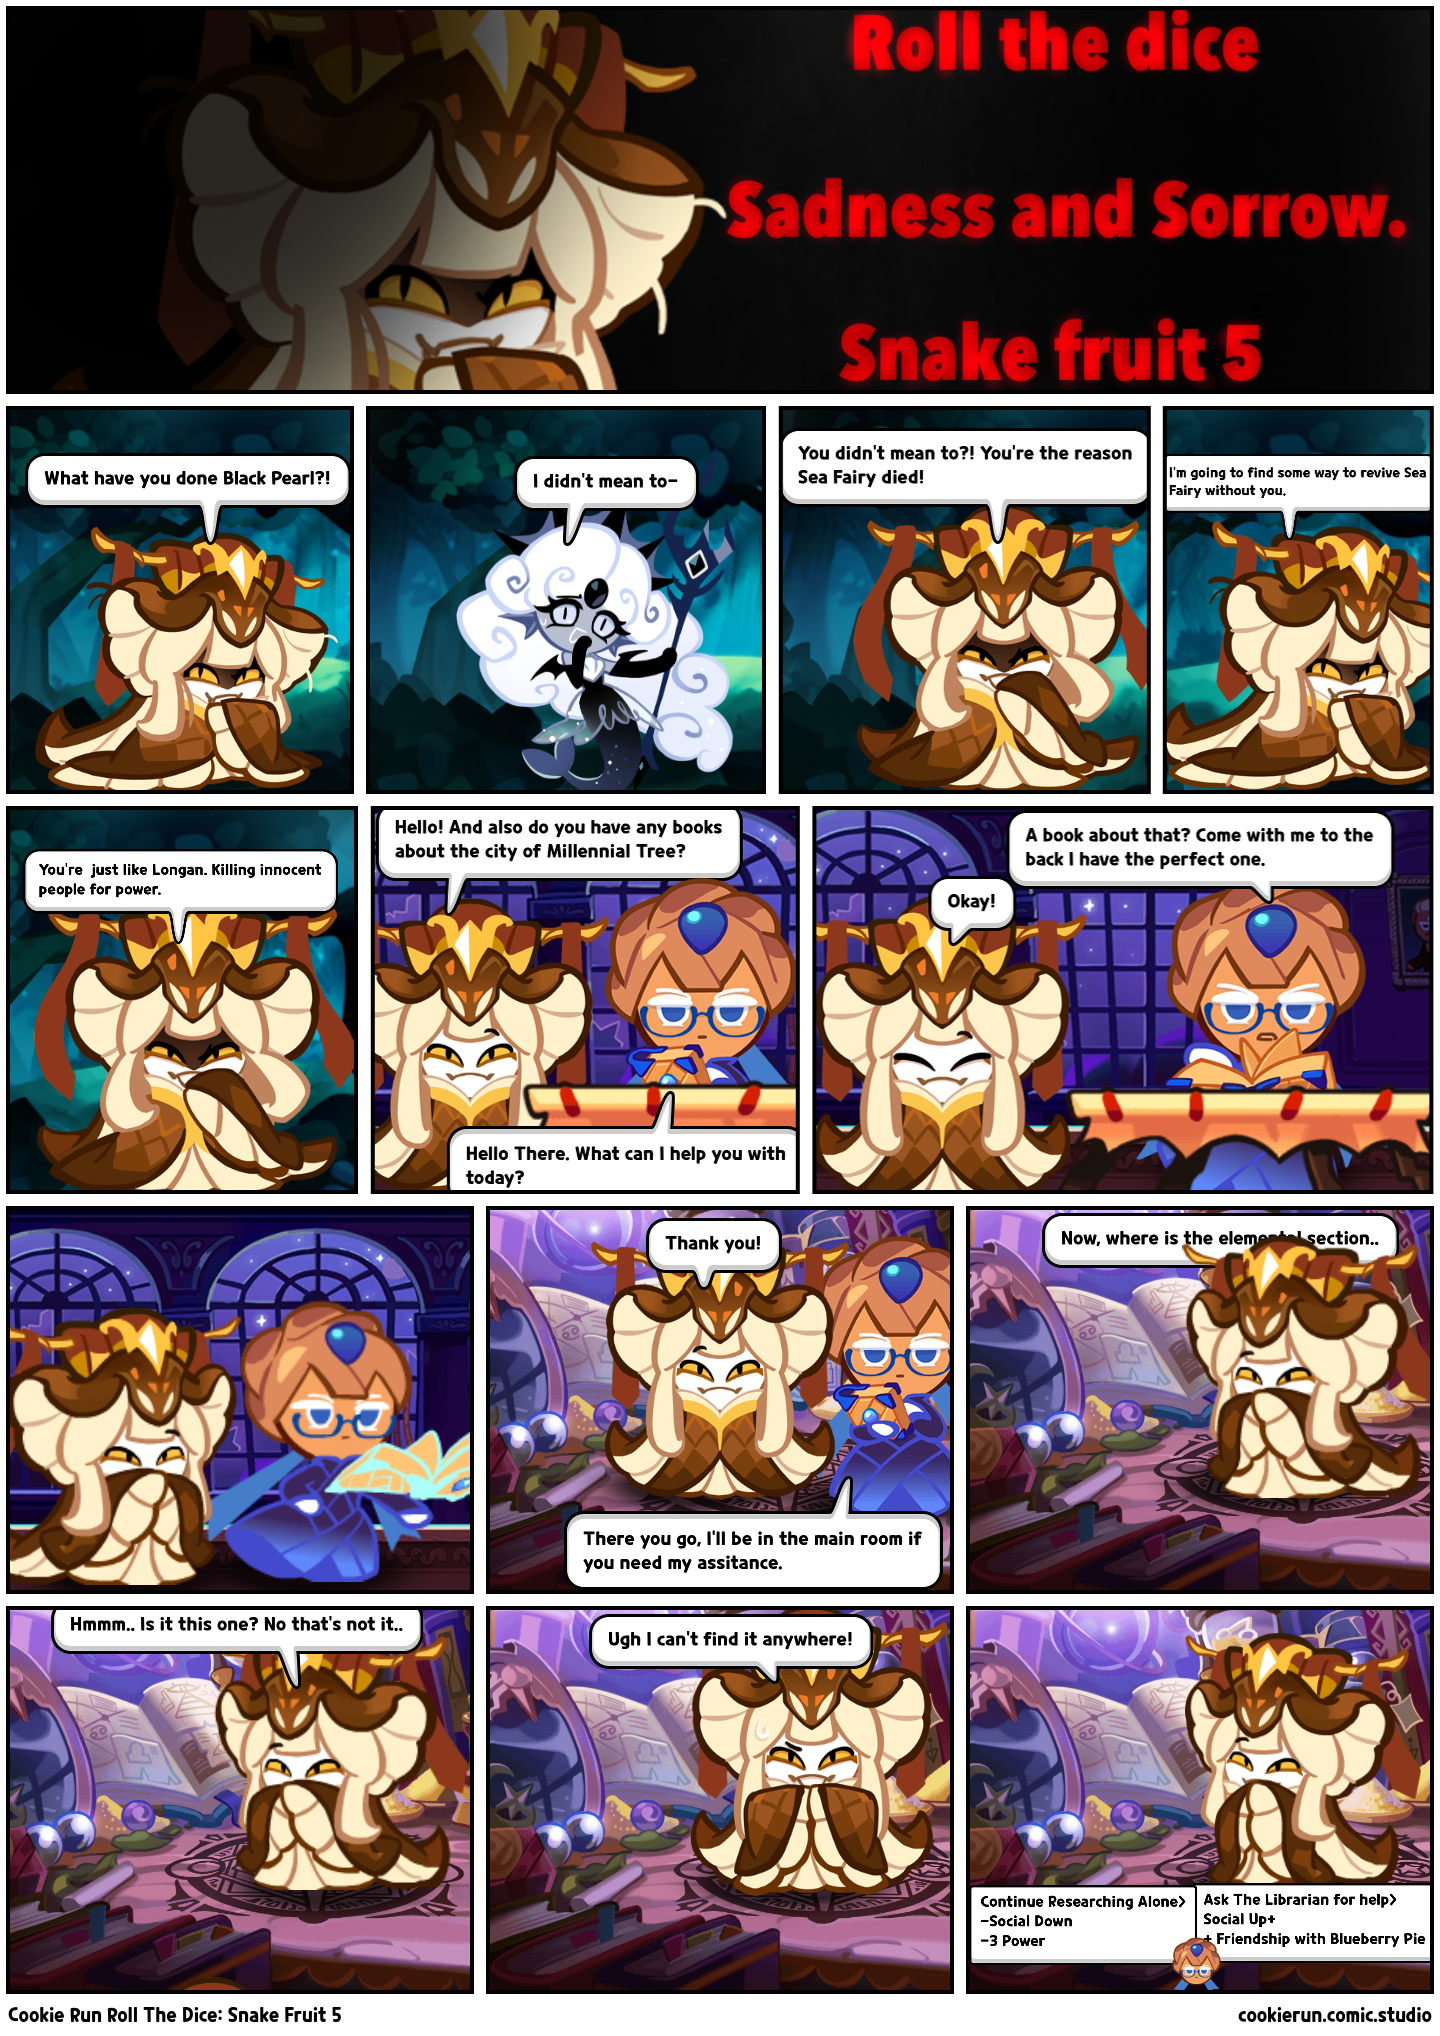 Cookie Run Roll The Dice: Snake Fruit 5